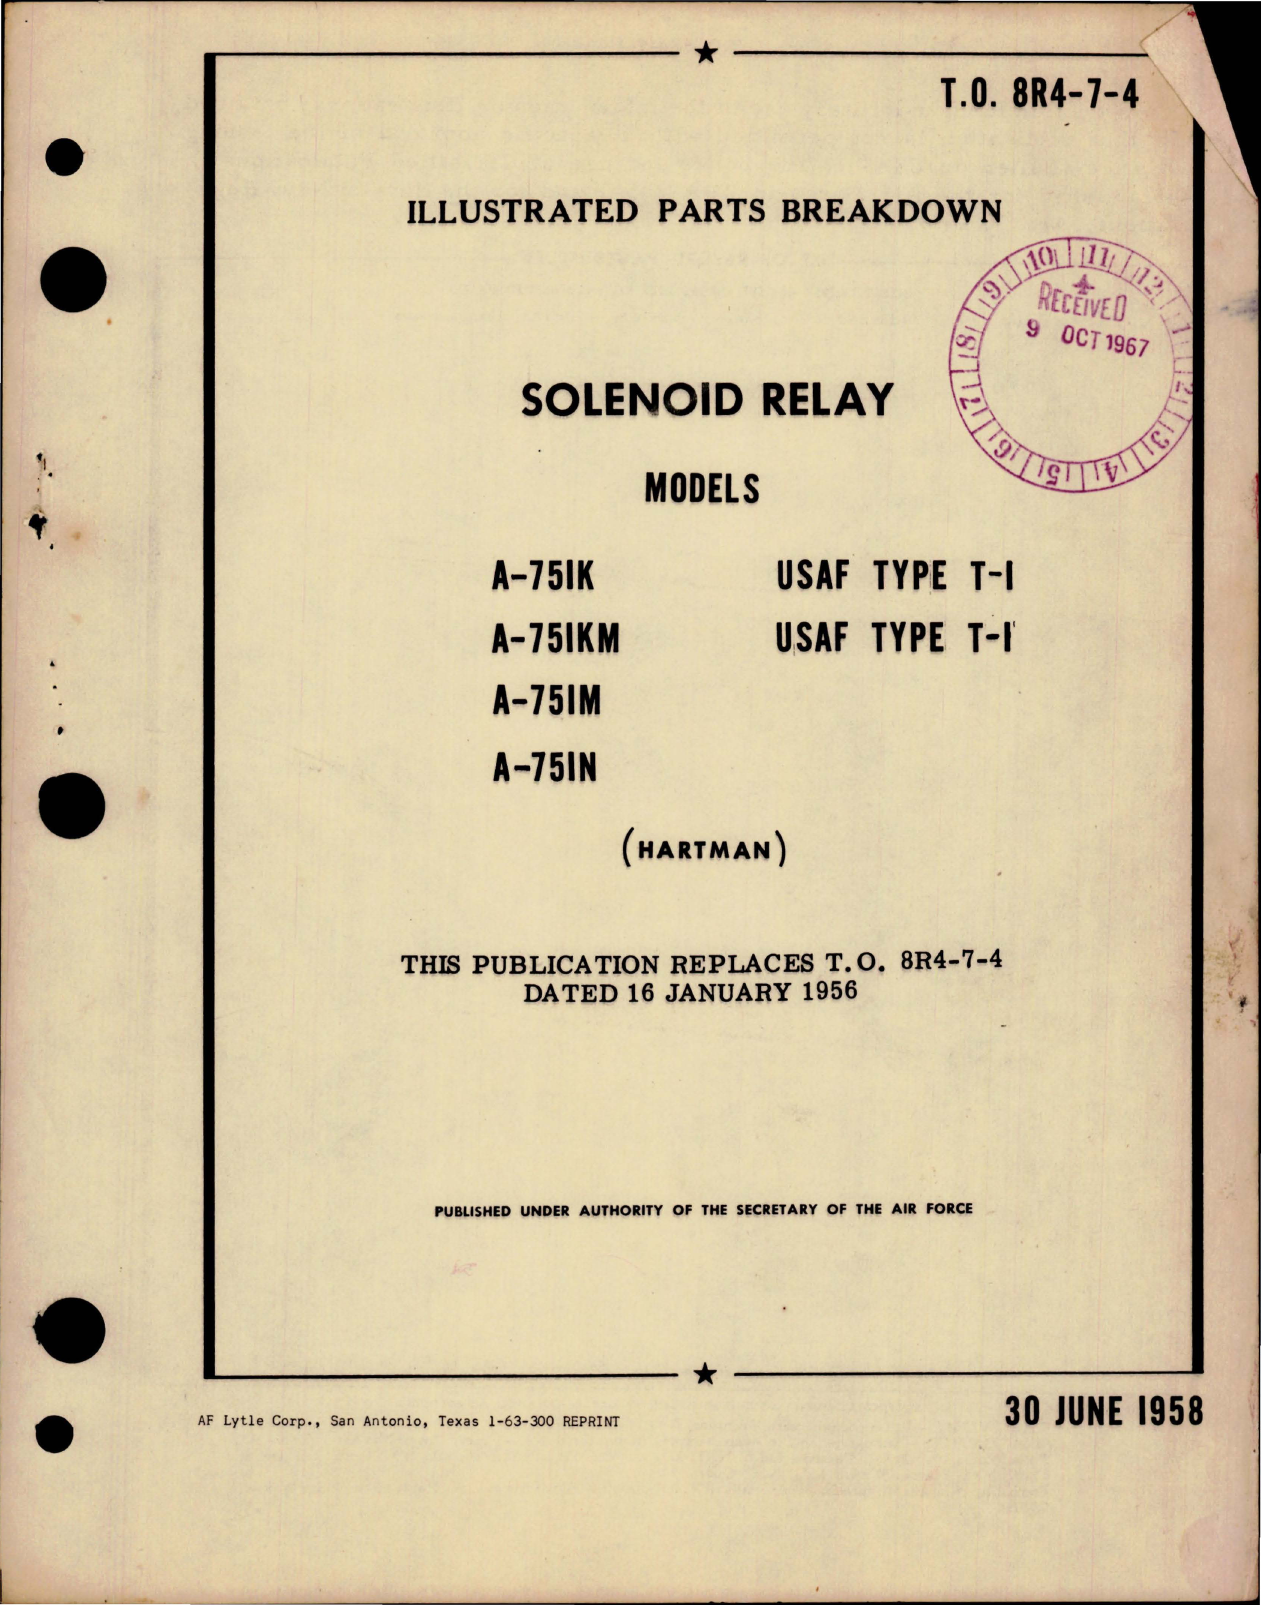 Sample page 1 from AirCorps Library document: Illustrated Parts Breakdown for Solenoid Relay - Type T-1